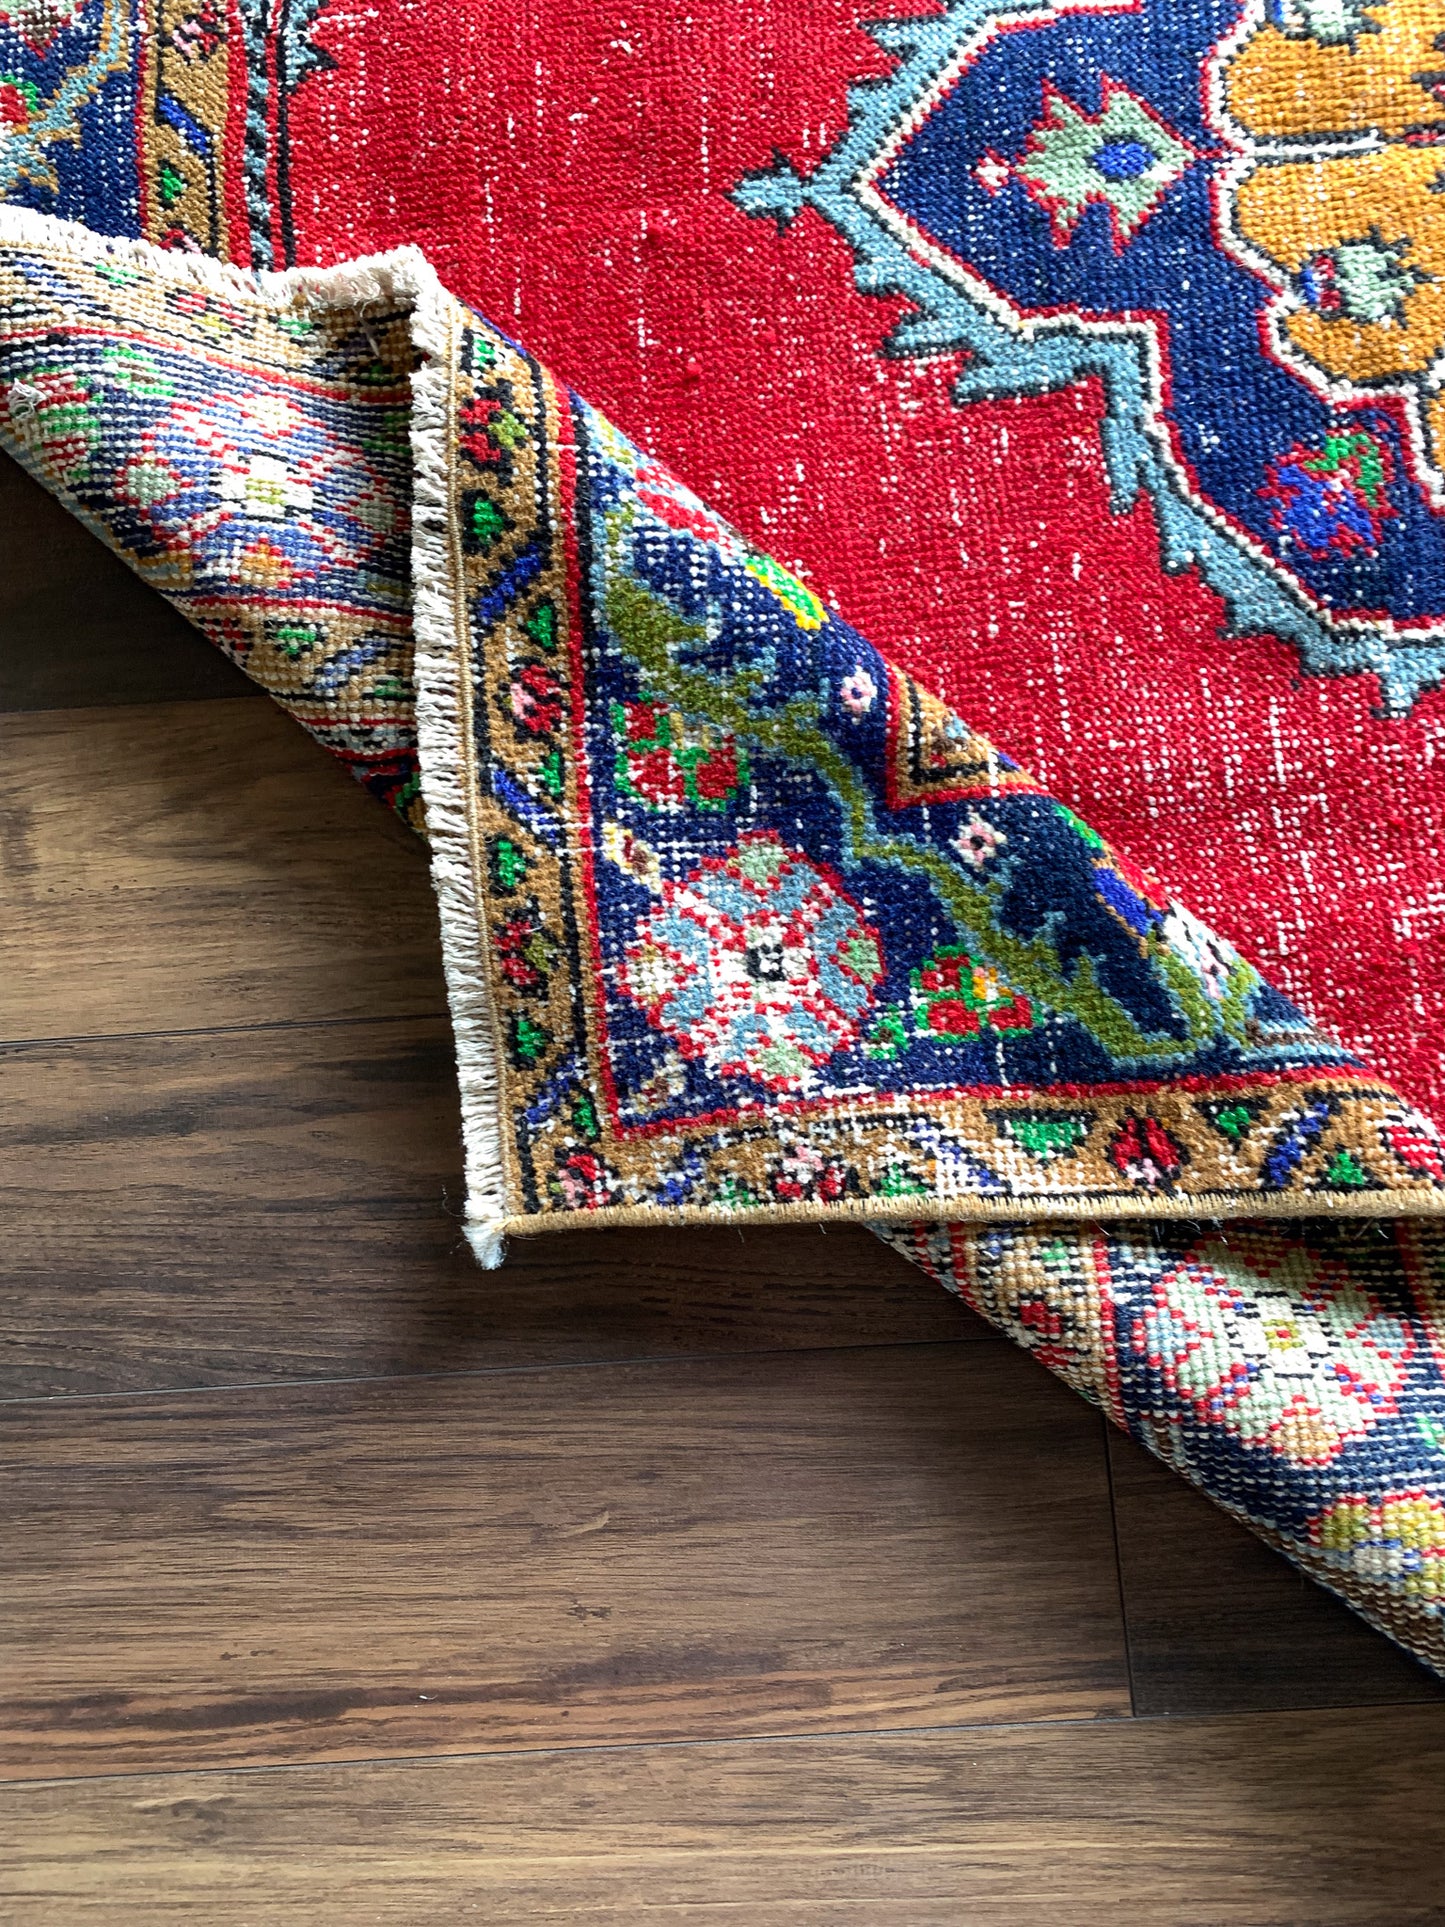 Reserved for Kathy - A1100 - 4.6' x 10.7' Vintage Turkish Area Rug